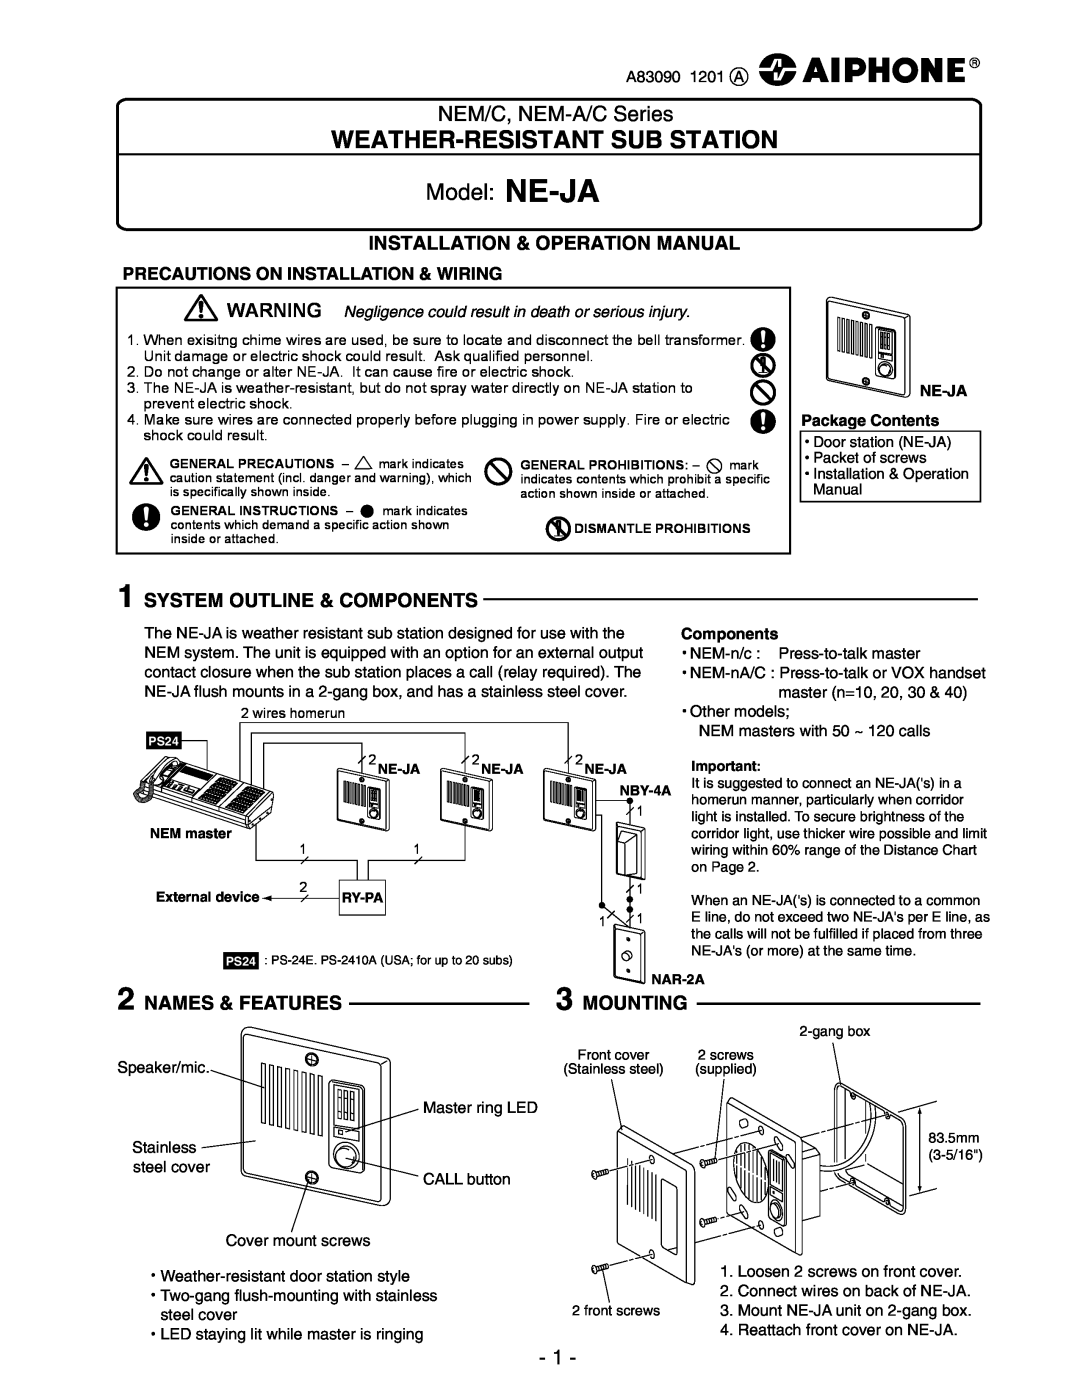 Aiphone NE-JA operation manual System Outline & Components, Names & Features, Precautions On Installation & Wiring 